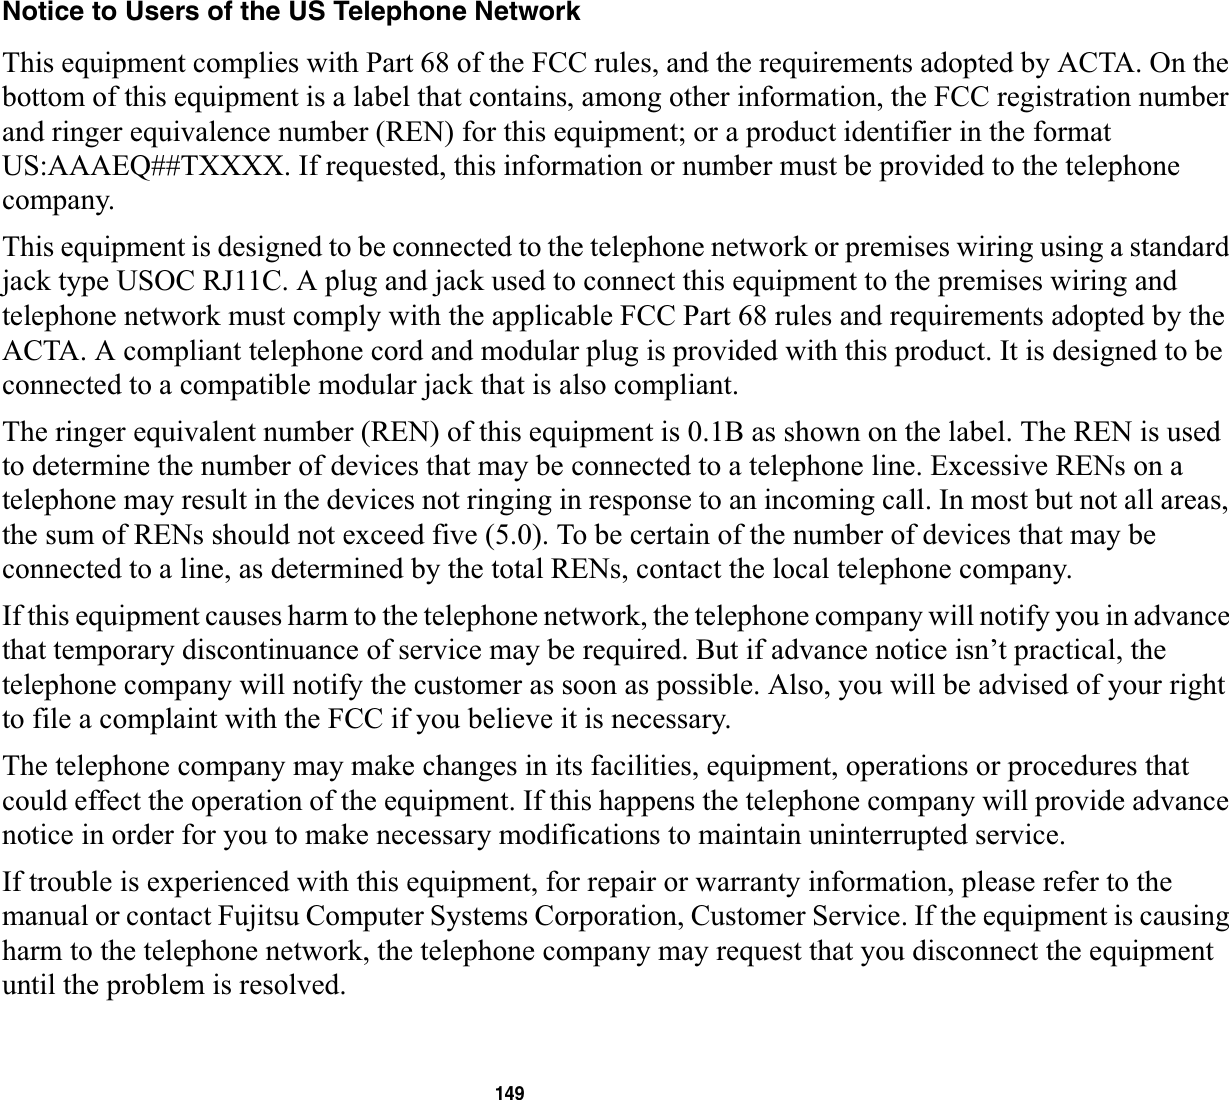 149Notice to Users of the US Telephone NetworkThis equipment complies with Part 68 of the FCC rules, and the requirements adopted by ACTA. On the bottom of this equipment is a label that contains, among other information, the FCC registration number and ringer equivalence number (REN) for this equipment; or a product identifier in the format US:AAAEQ##TXXXX. If requested, this information or number must be provided to the telephone company.This equipment is designed to be connected to the telephone network or premises wiring using a standard jack type USOC RJ11C. A plug and jack used to connect this equipment to the premises wiring and telephone network must comply with the applicable FCC Part 68 rules and requirements adopted by the ACTA. A compliant telephone cord and modular plug is provided with this product. It is designed to be connected to a compatible modular jack that is also compliant.The ringer equivalent number (REN) of this equipment is 0.1B as shown on the label. The REN is used to determine the number of devices that may be connected to a telephone line. Excessive RENs on a telephone may result in the devices not ringing in response to an incoming call. In most but not all areas, the sum of RENs should not exceed five (5.0). To be certain of the number of devices that may be connected to a line, as determined by the total RENs, contact the local telephone company. If this equipment causes harm to the telephone network, the telephone company will notify you in advance that temporary discontinuance of service may be required. But if advance notice isn’t practical, the telephone company will notify the customer as soon as possible. Also, you will be advised of your right to file a complaint with the FCC if you believe it is necessary.The telephone company may make changes in its facilities, equipment, operations or procedures that could effect the operation of the equipment. If this happens the telephone company will provide advance notice in order for you to make necessary modifications to maintain uninterrupted service. If trouble is experienced with this equipment, for repair or warranty information, please refer to the manual or contact Fujitsu Computer Systems Corporation, Customer Service. If the equipment is causing harm to the telephone network, the telephone company may request that you disconnect the equipment until the problem is resolved.